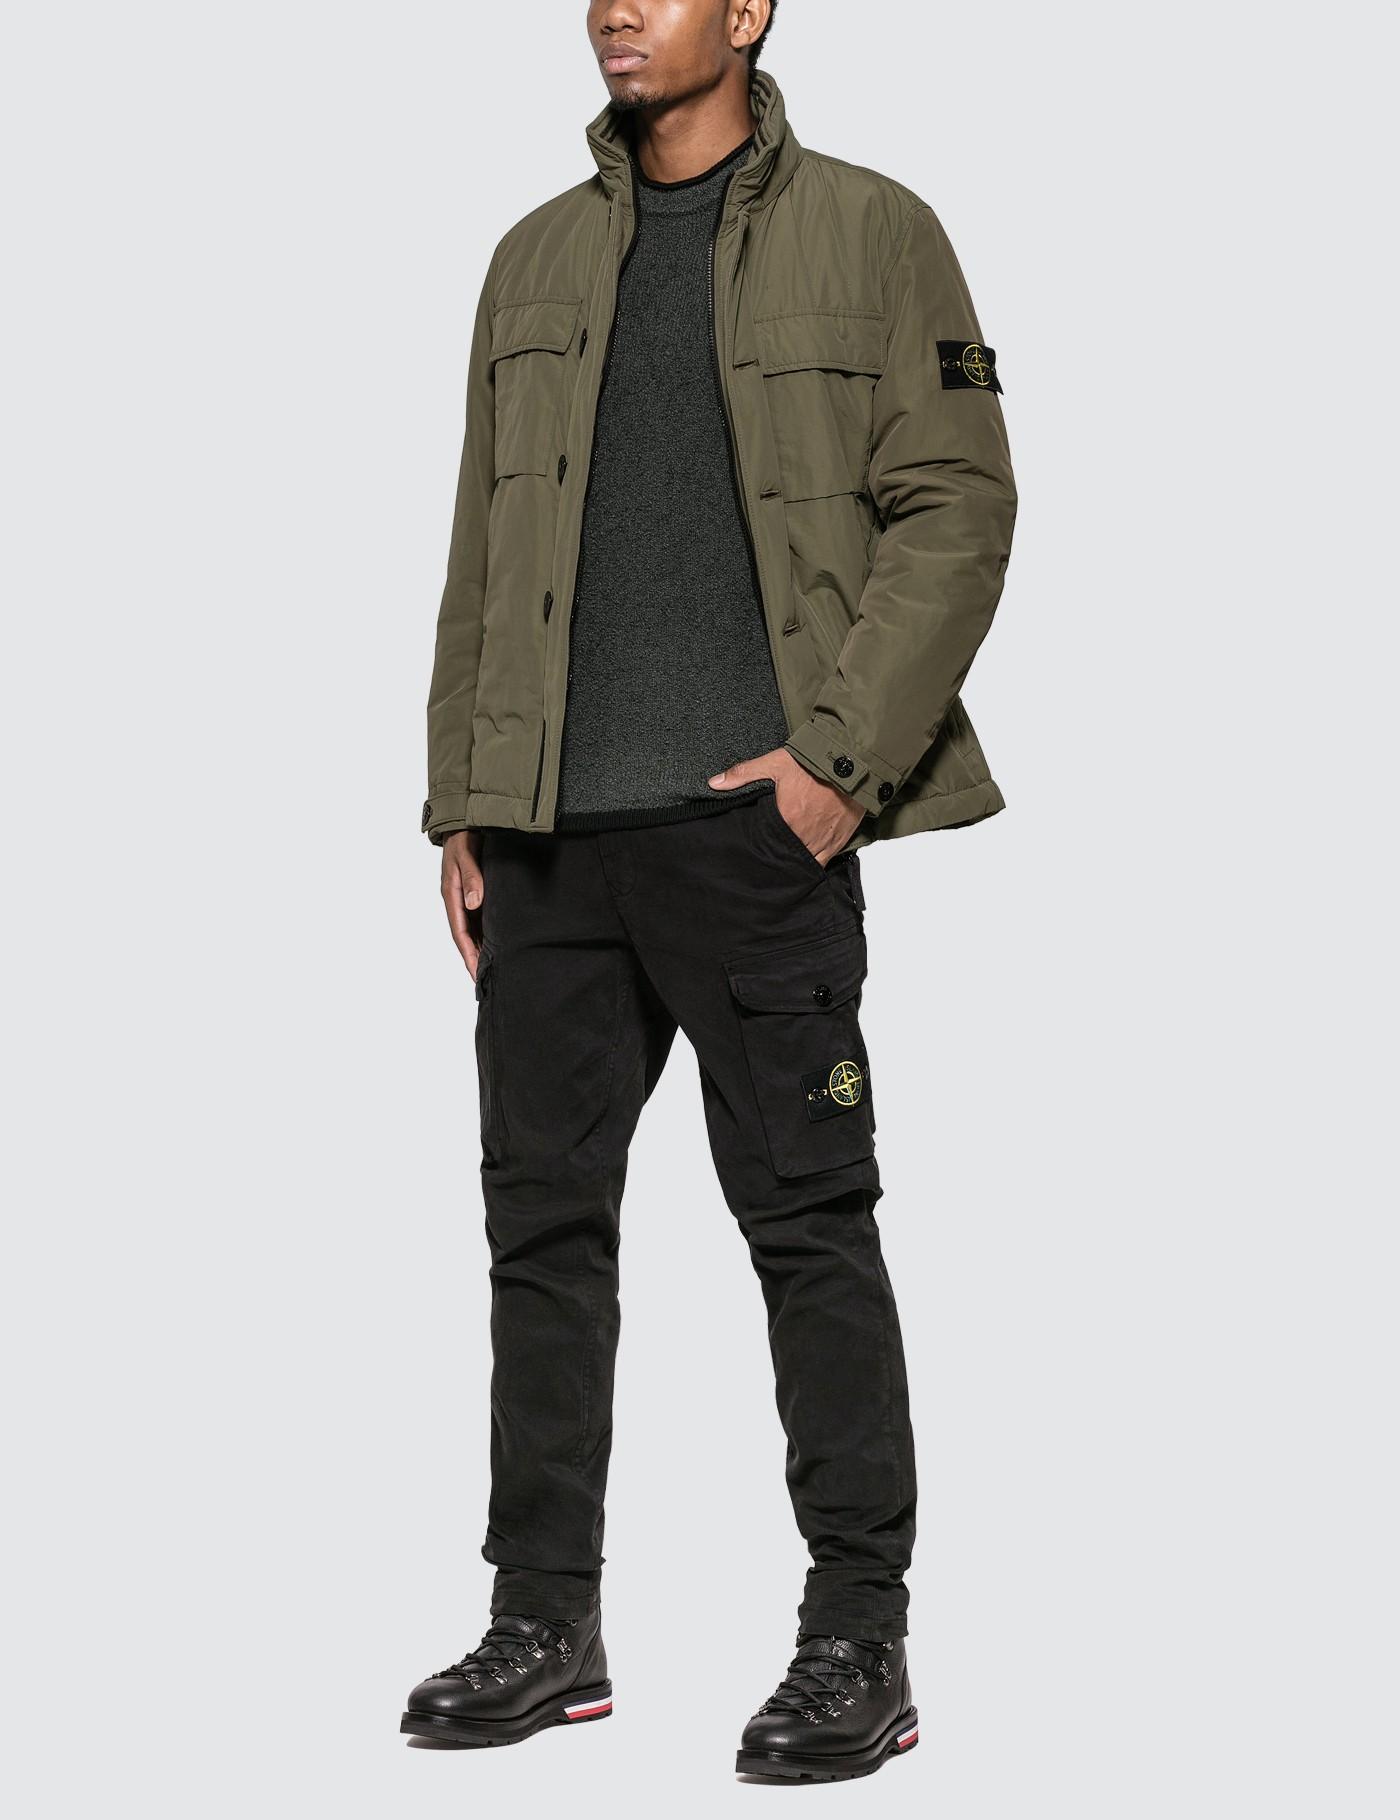 Stone Island Cotton Slim Fit Cargo Pants in Black for Men - Lyst